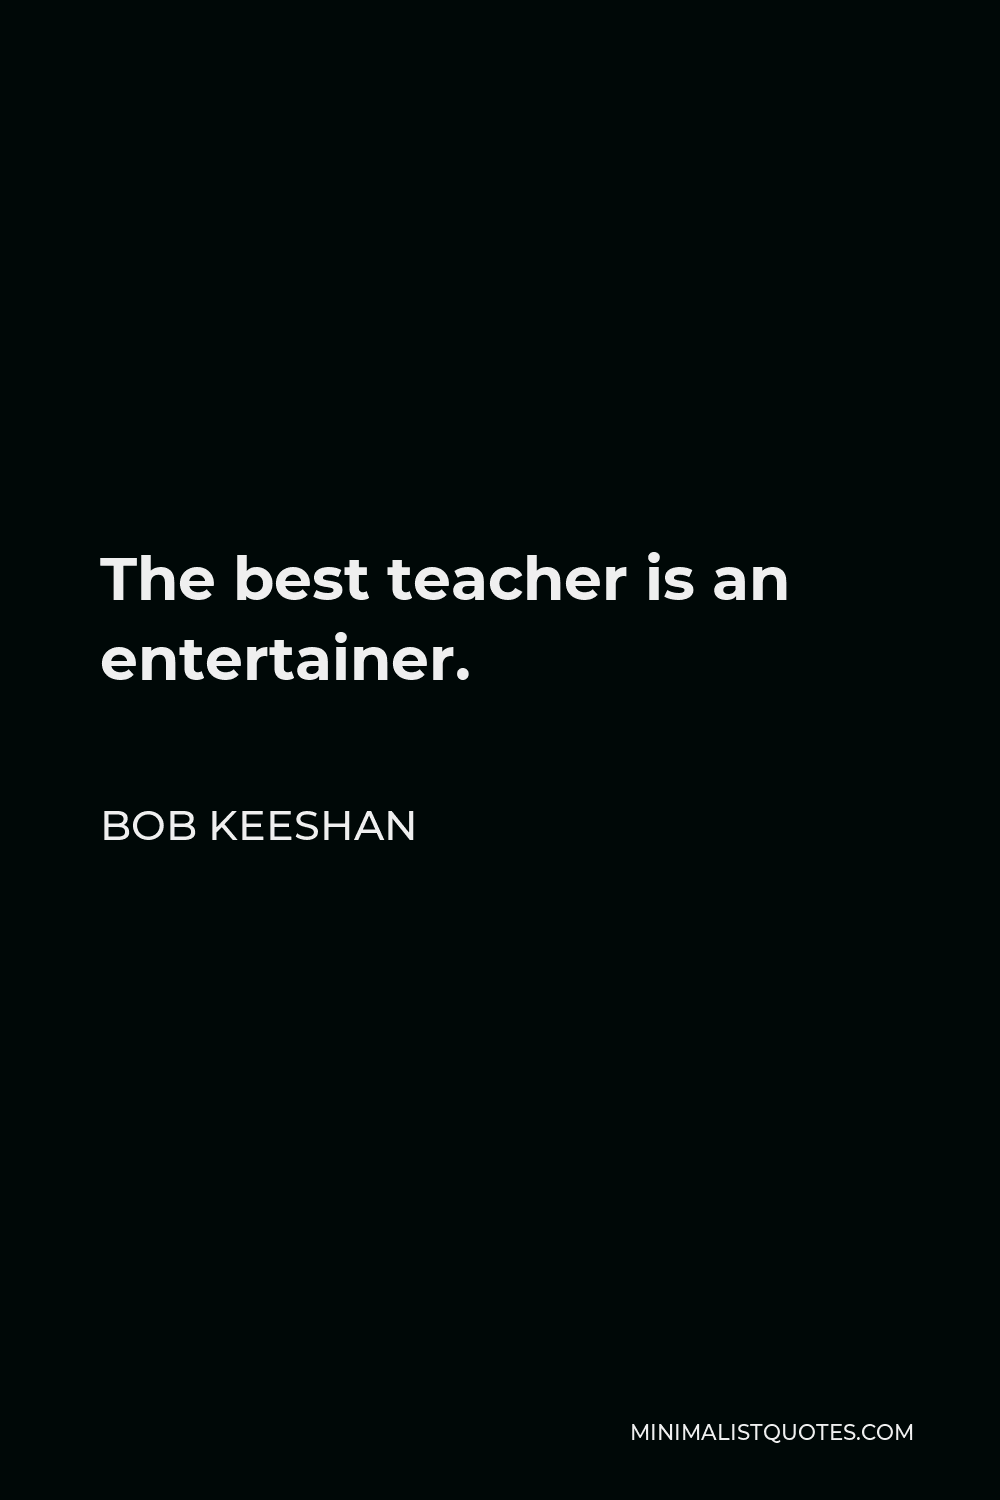 Bob Keeshan Quote - The best teacher is an entertainer.